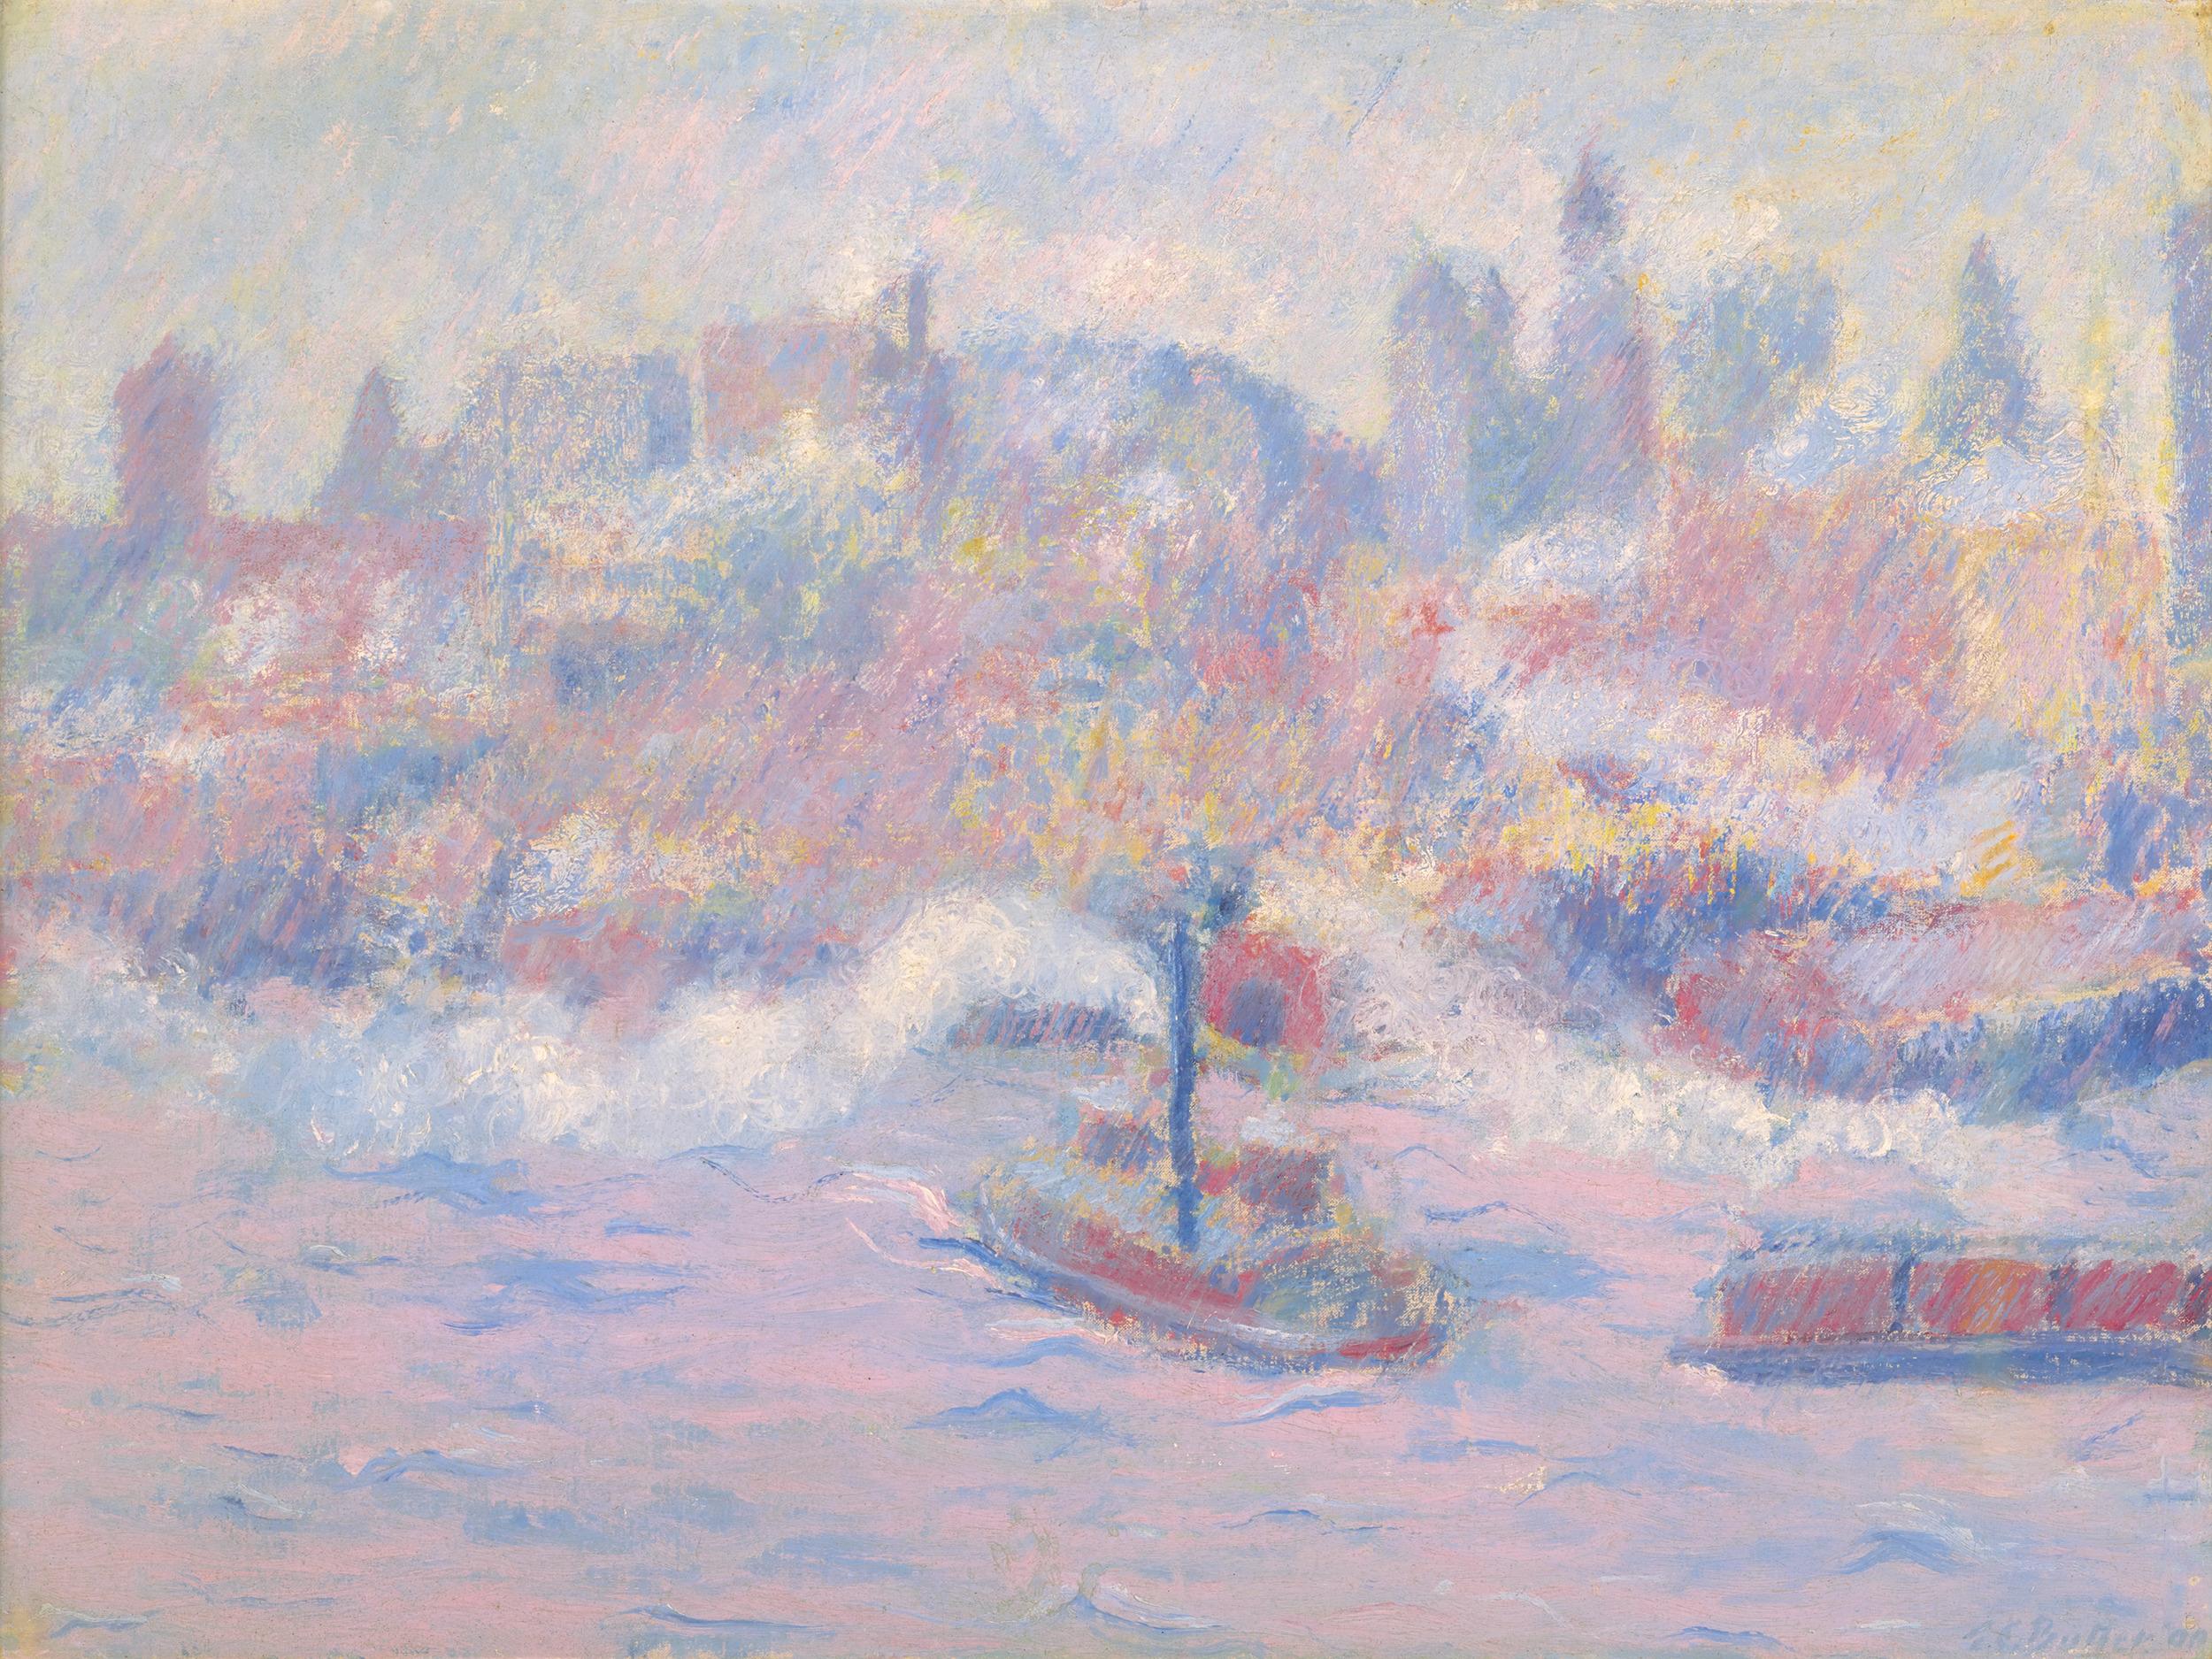 Theodore Earl Butler
1861-1936  American

East River

Signed and dated "T.E. Butler 00" (lower left)
Oil on canvas

Theodore Earl Butler was a leading figure of the American Impressionist movement, and this oil on canvas is a highly important